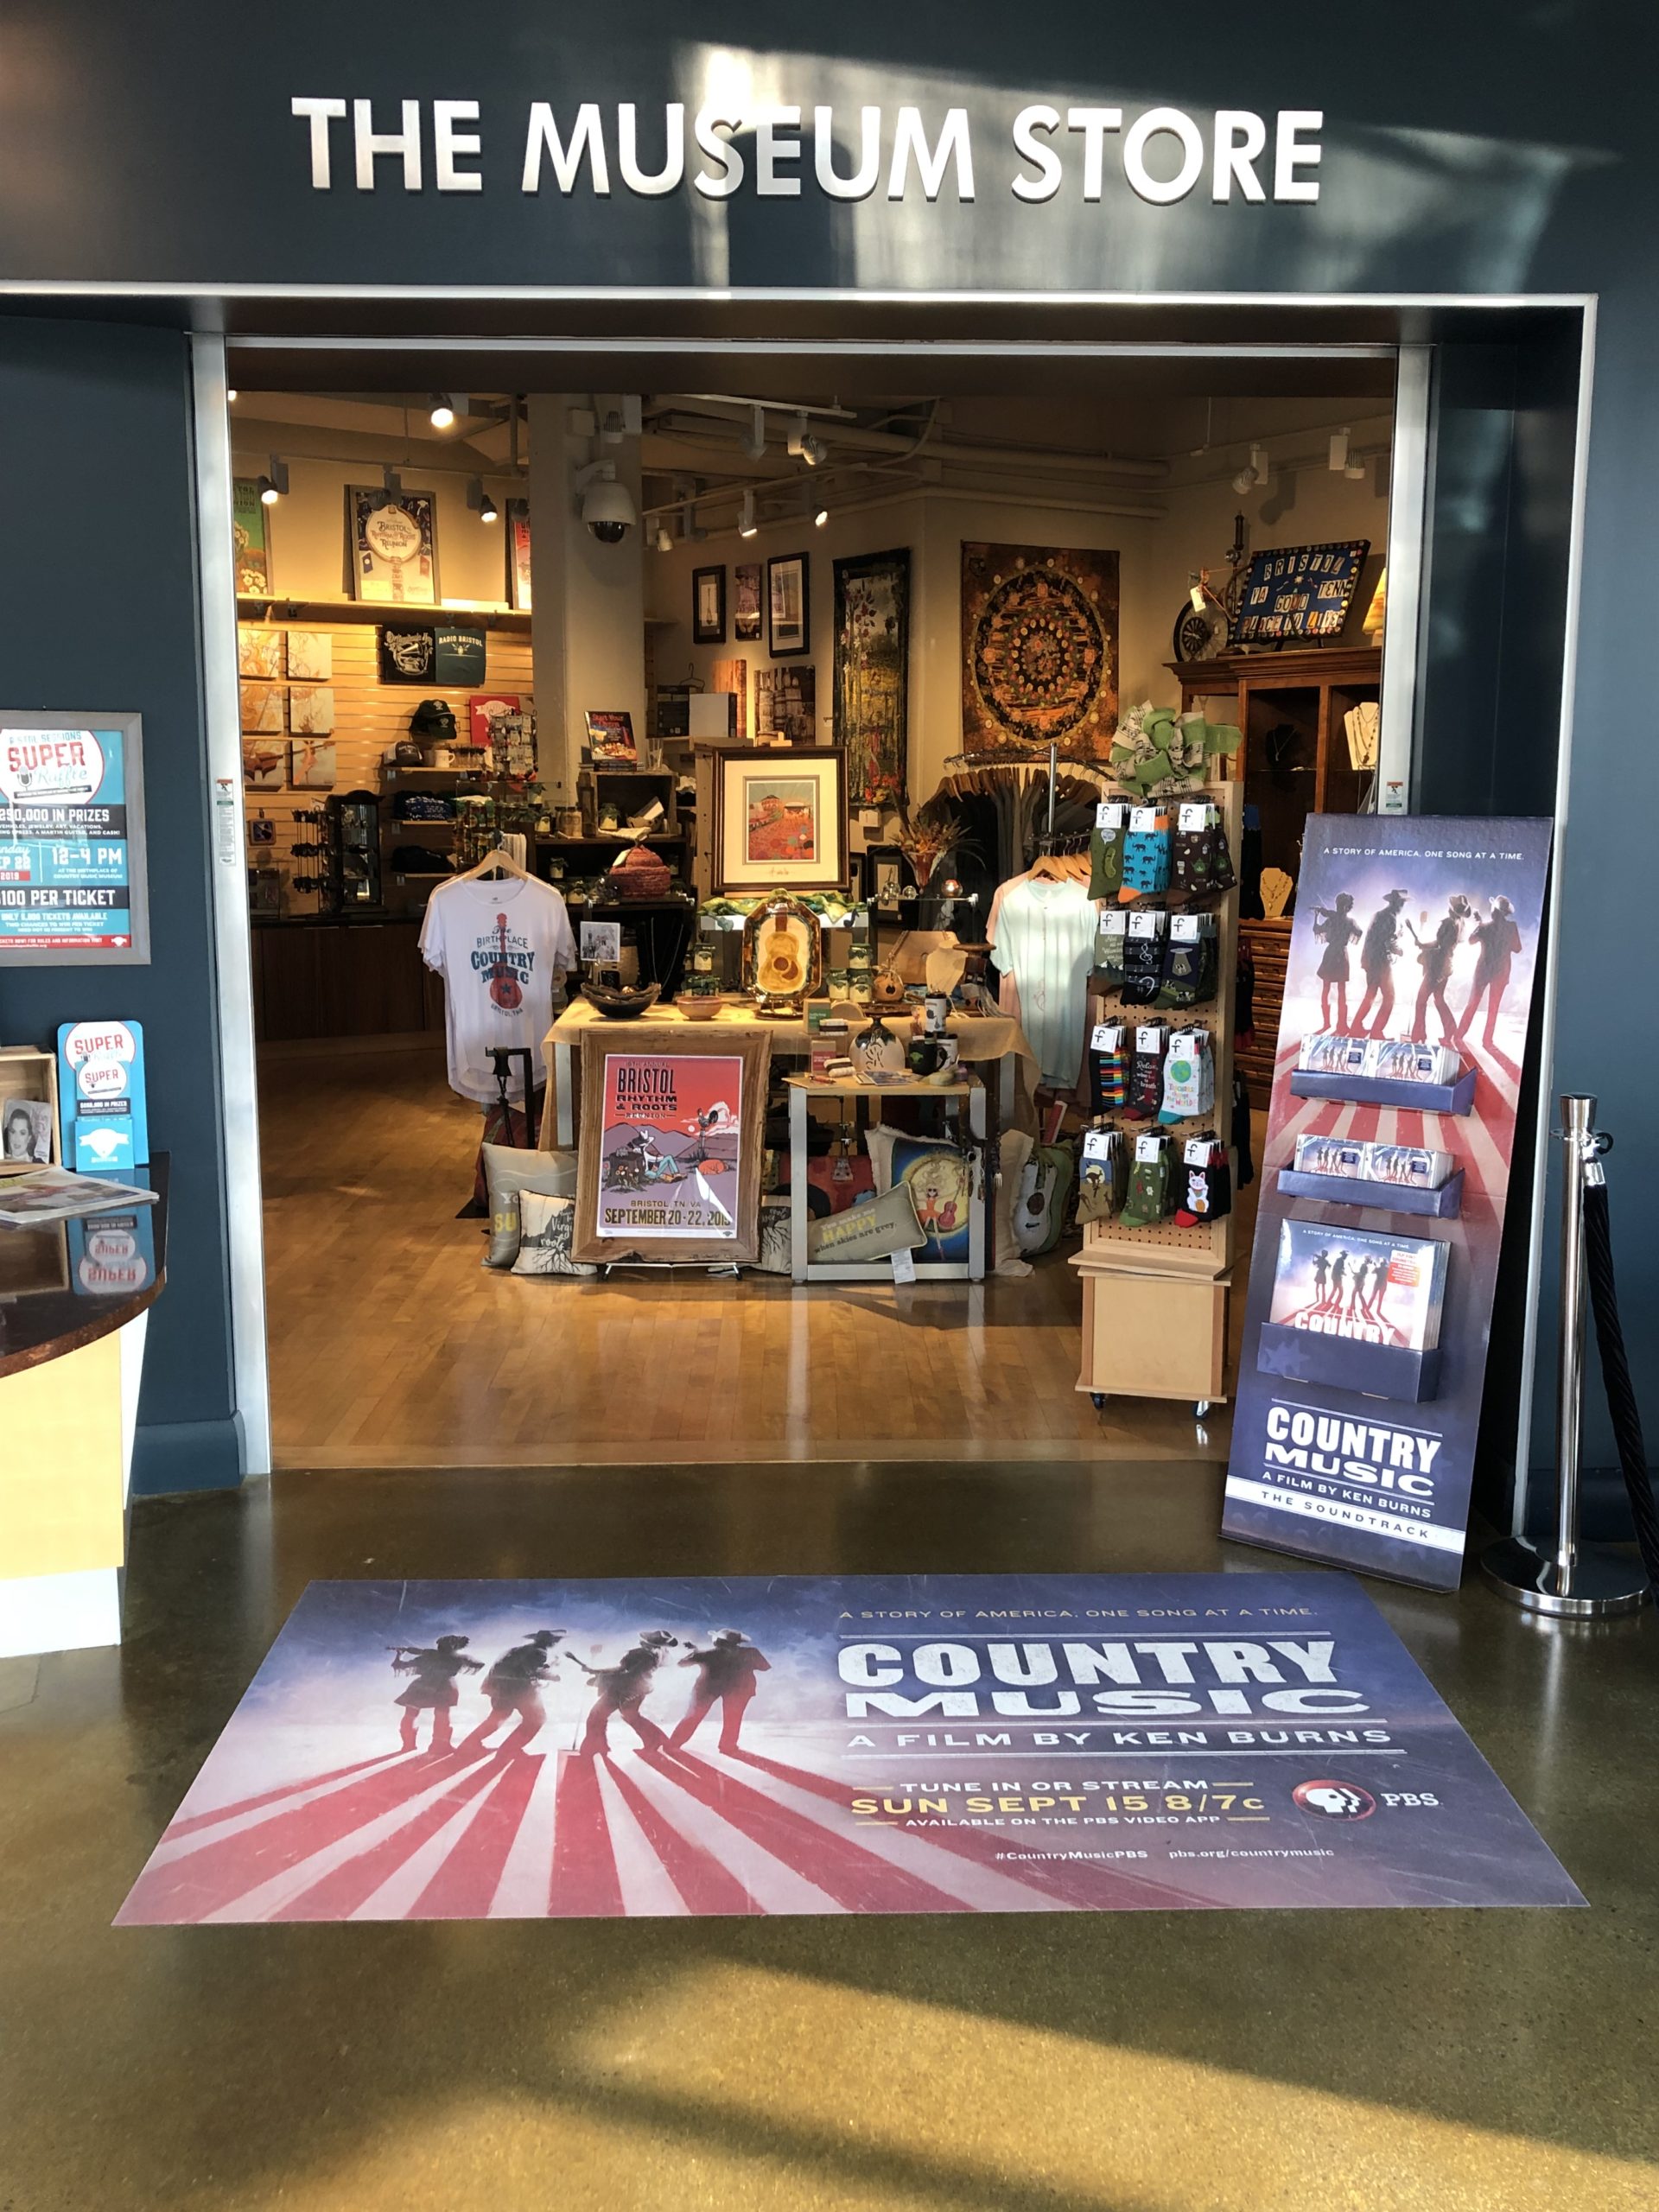 A shot of The Museum Store entrance with promotional displays related to Ken Burns' Country Music.